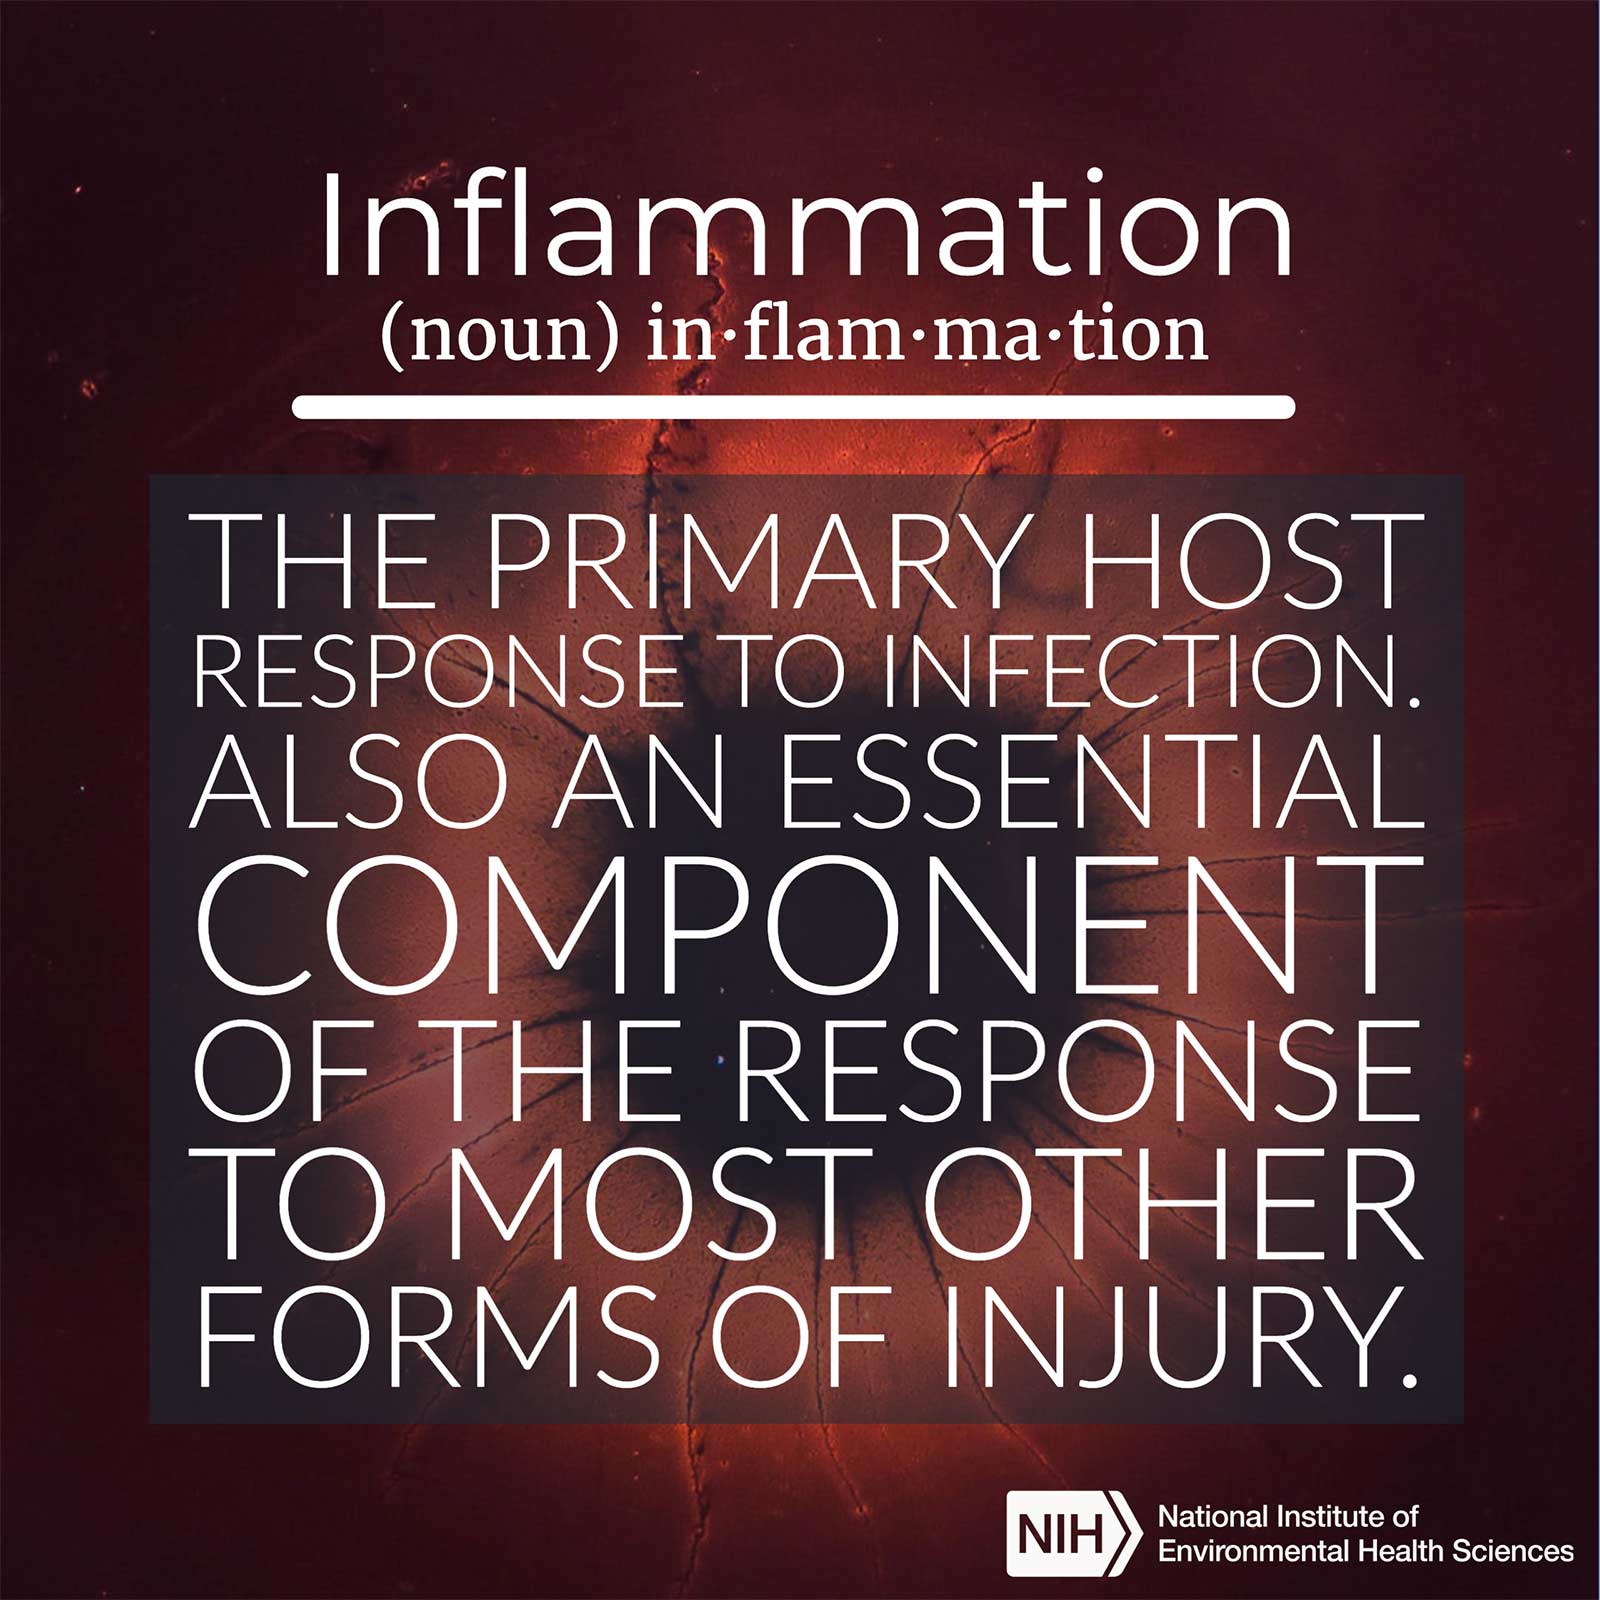 Inflammation (noun) defined as 'the primary host repsonse to infection. Also an essential component of the response to most other forms of injury.'